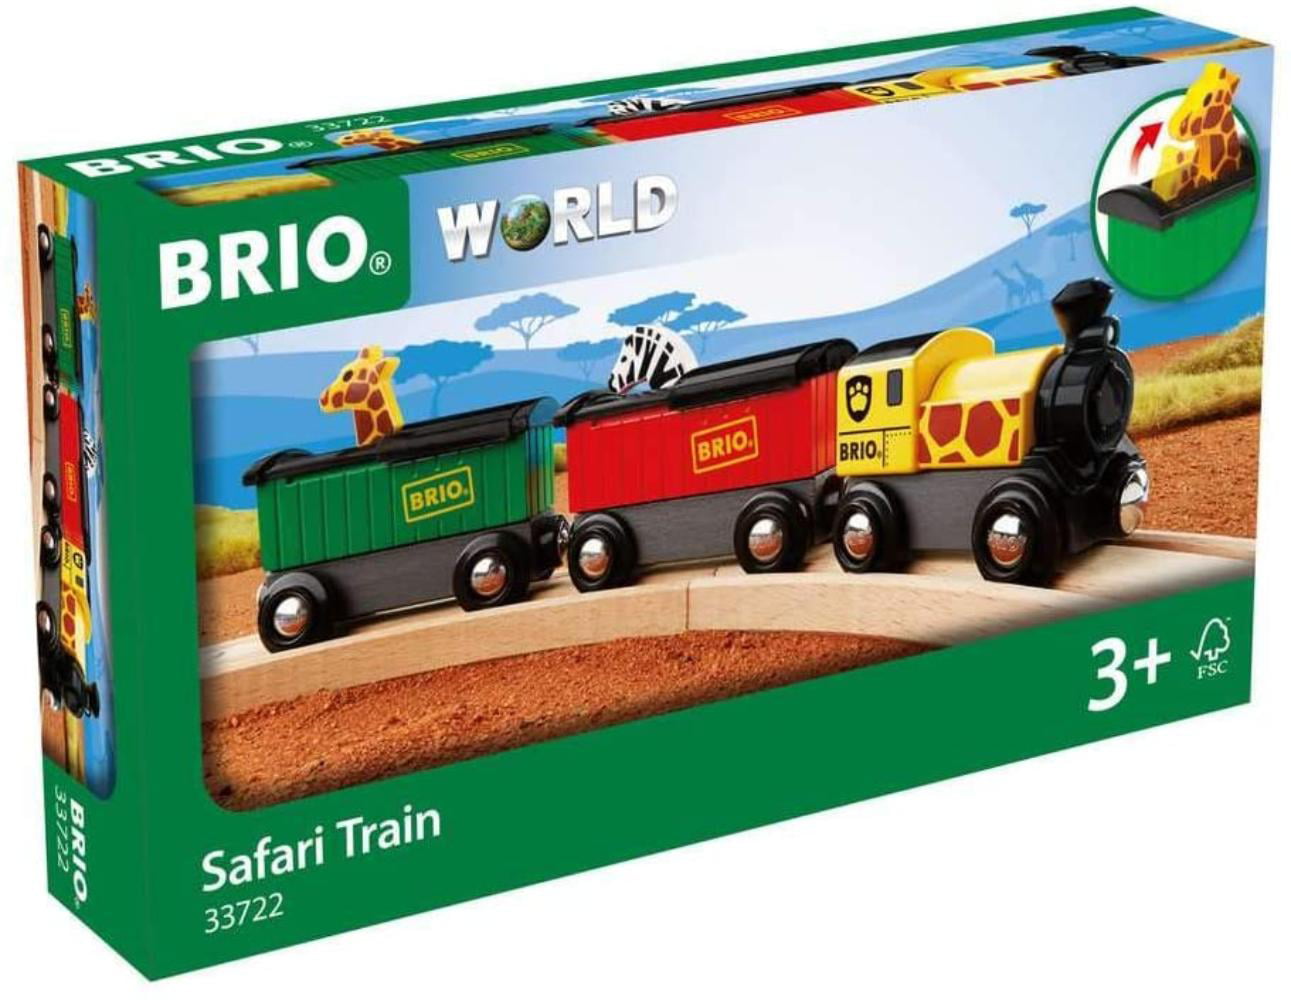 BRIO World Car Racing Kit for Kids Age 3 Years and Up Compatible with All BRIO 